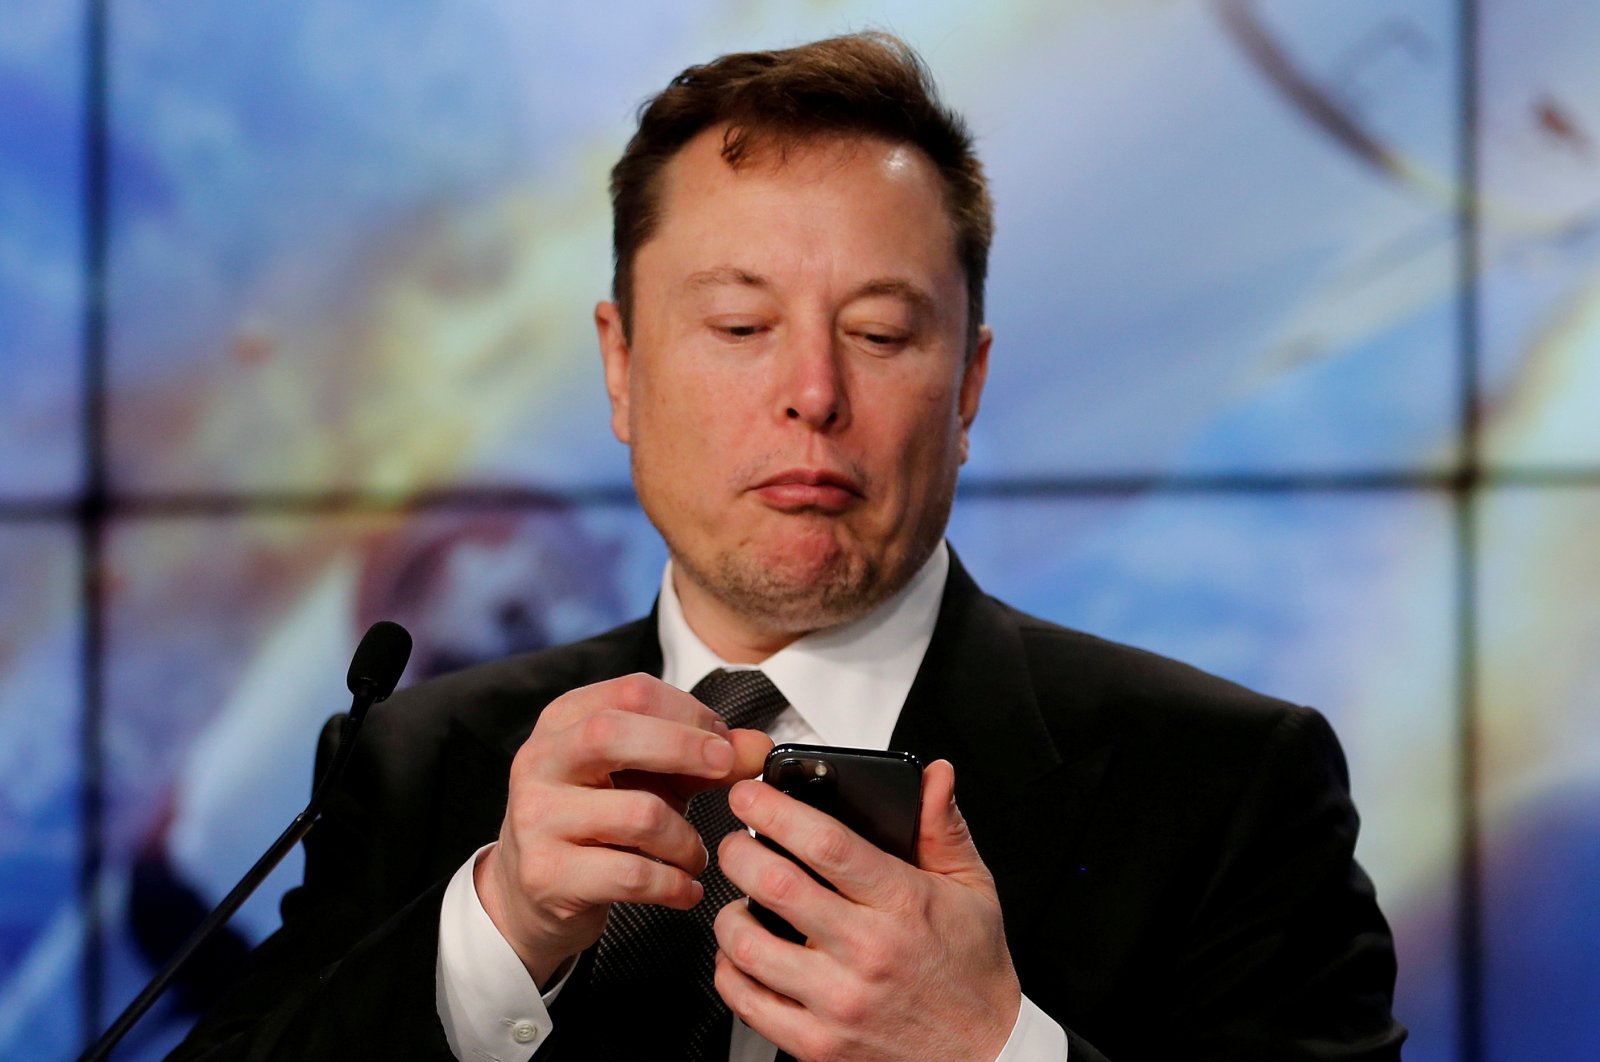 SpaceX founder and chief engineer Elon Musk looks at his mobile phone during a post-launch news conference to discuss the  SpaceX Crew Dragon astronaut capsule in-flight abort test at the Kennedy Space Center in Cape Canaveral, Florida, U.S. Jan. 19, 2020. (Reuters Photo)